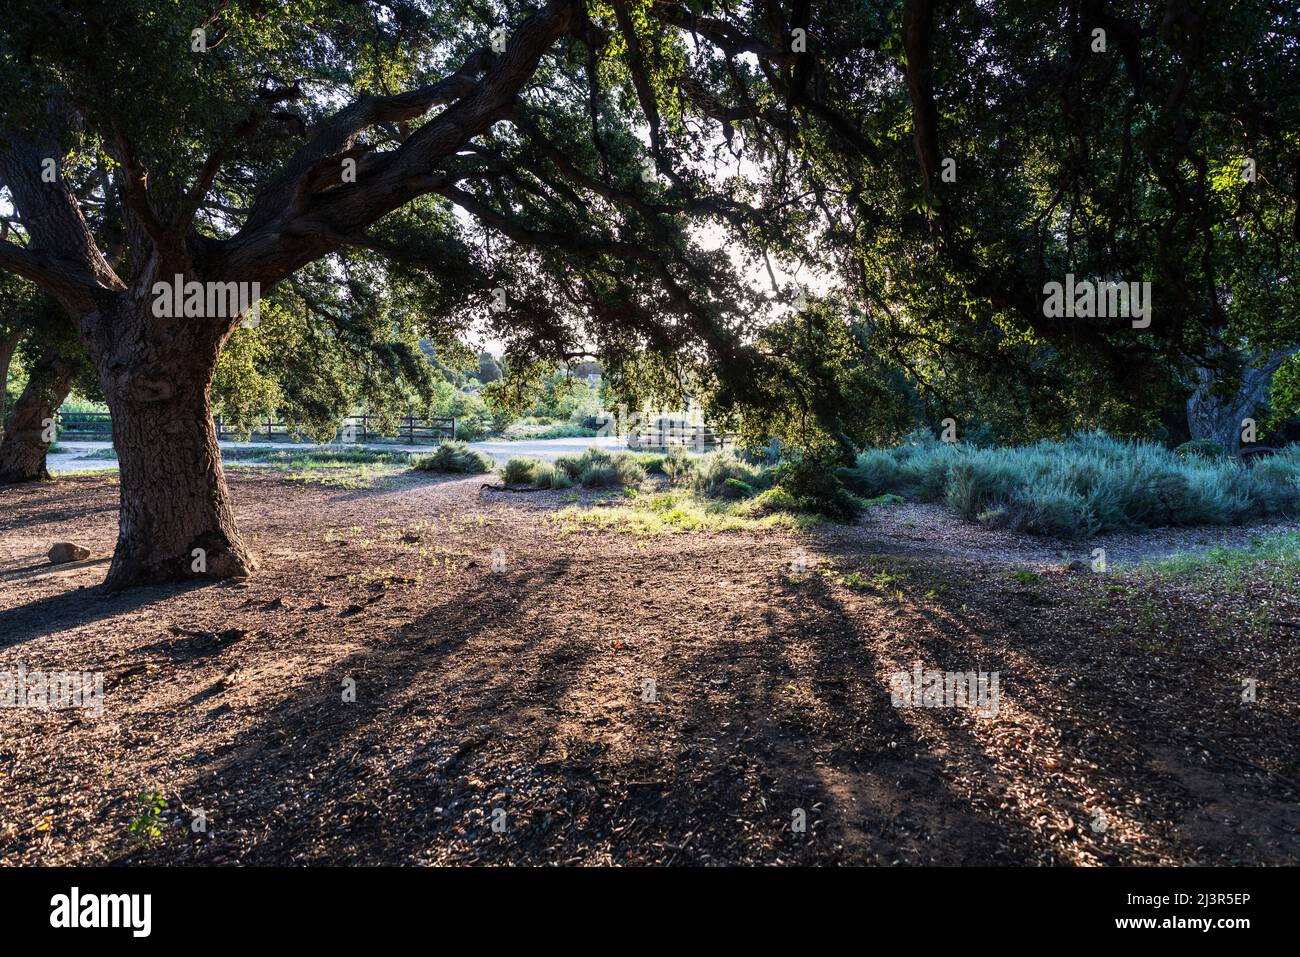 Large oak trees casting shadows in early morning light at Chatsworth Park South in the San Fernando Valley area of Los Angeles, California. Stock Photo